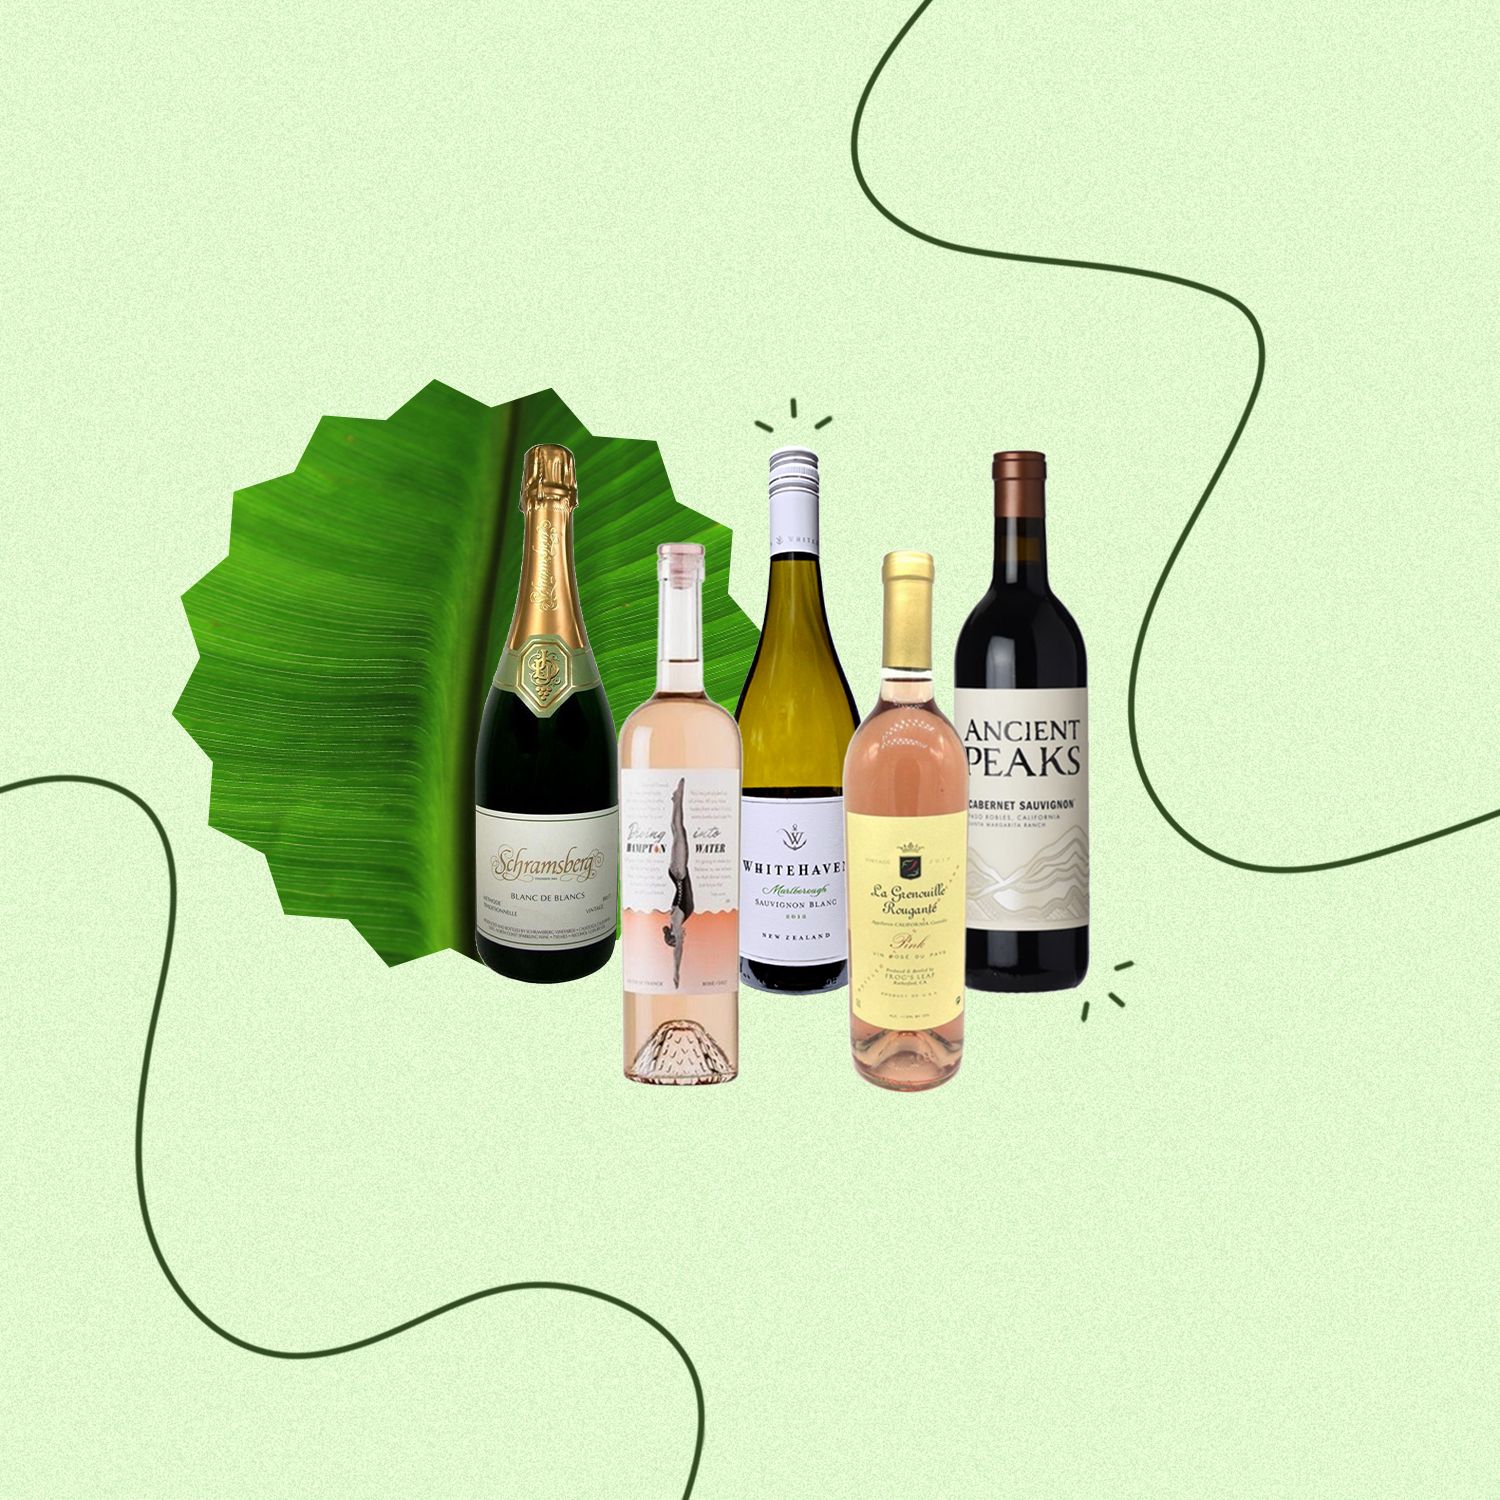 15 Best Organic Wine Brands 2022 - Sustainable Red And White Wines